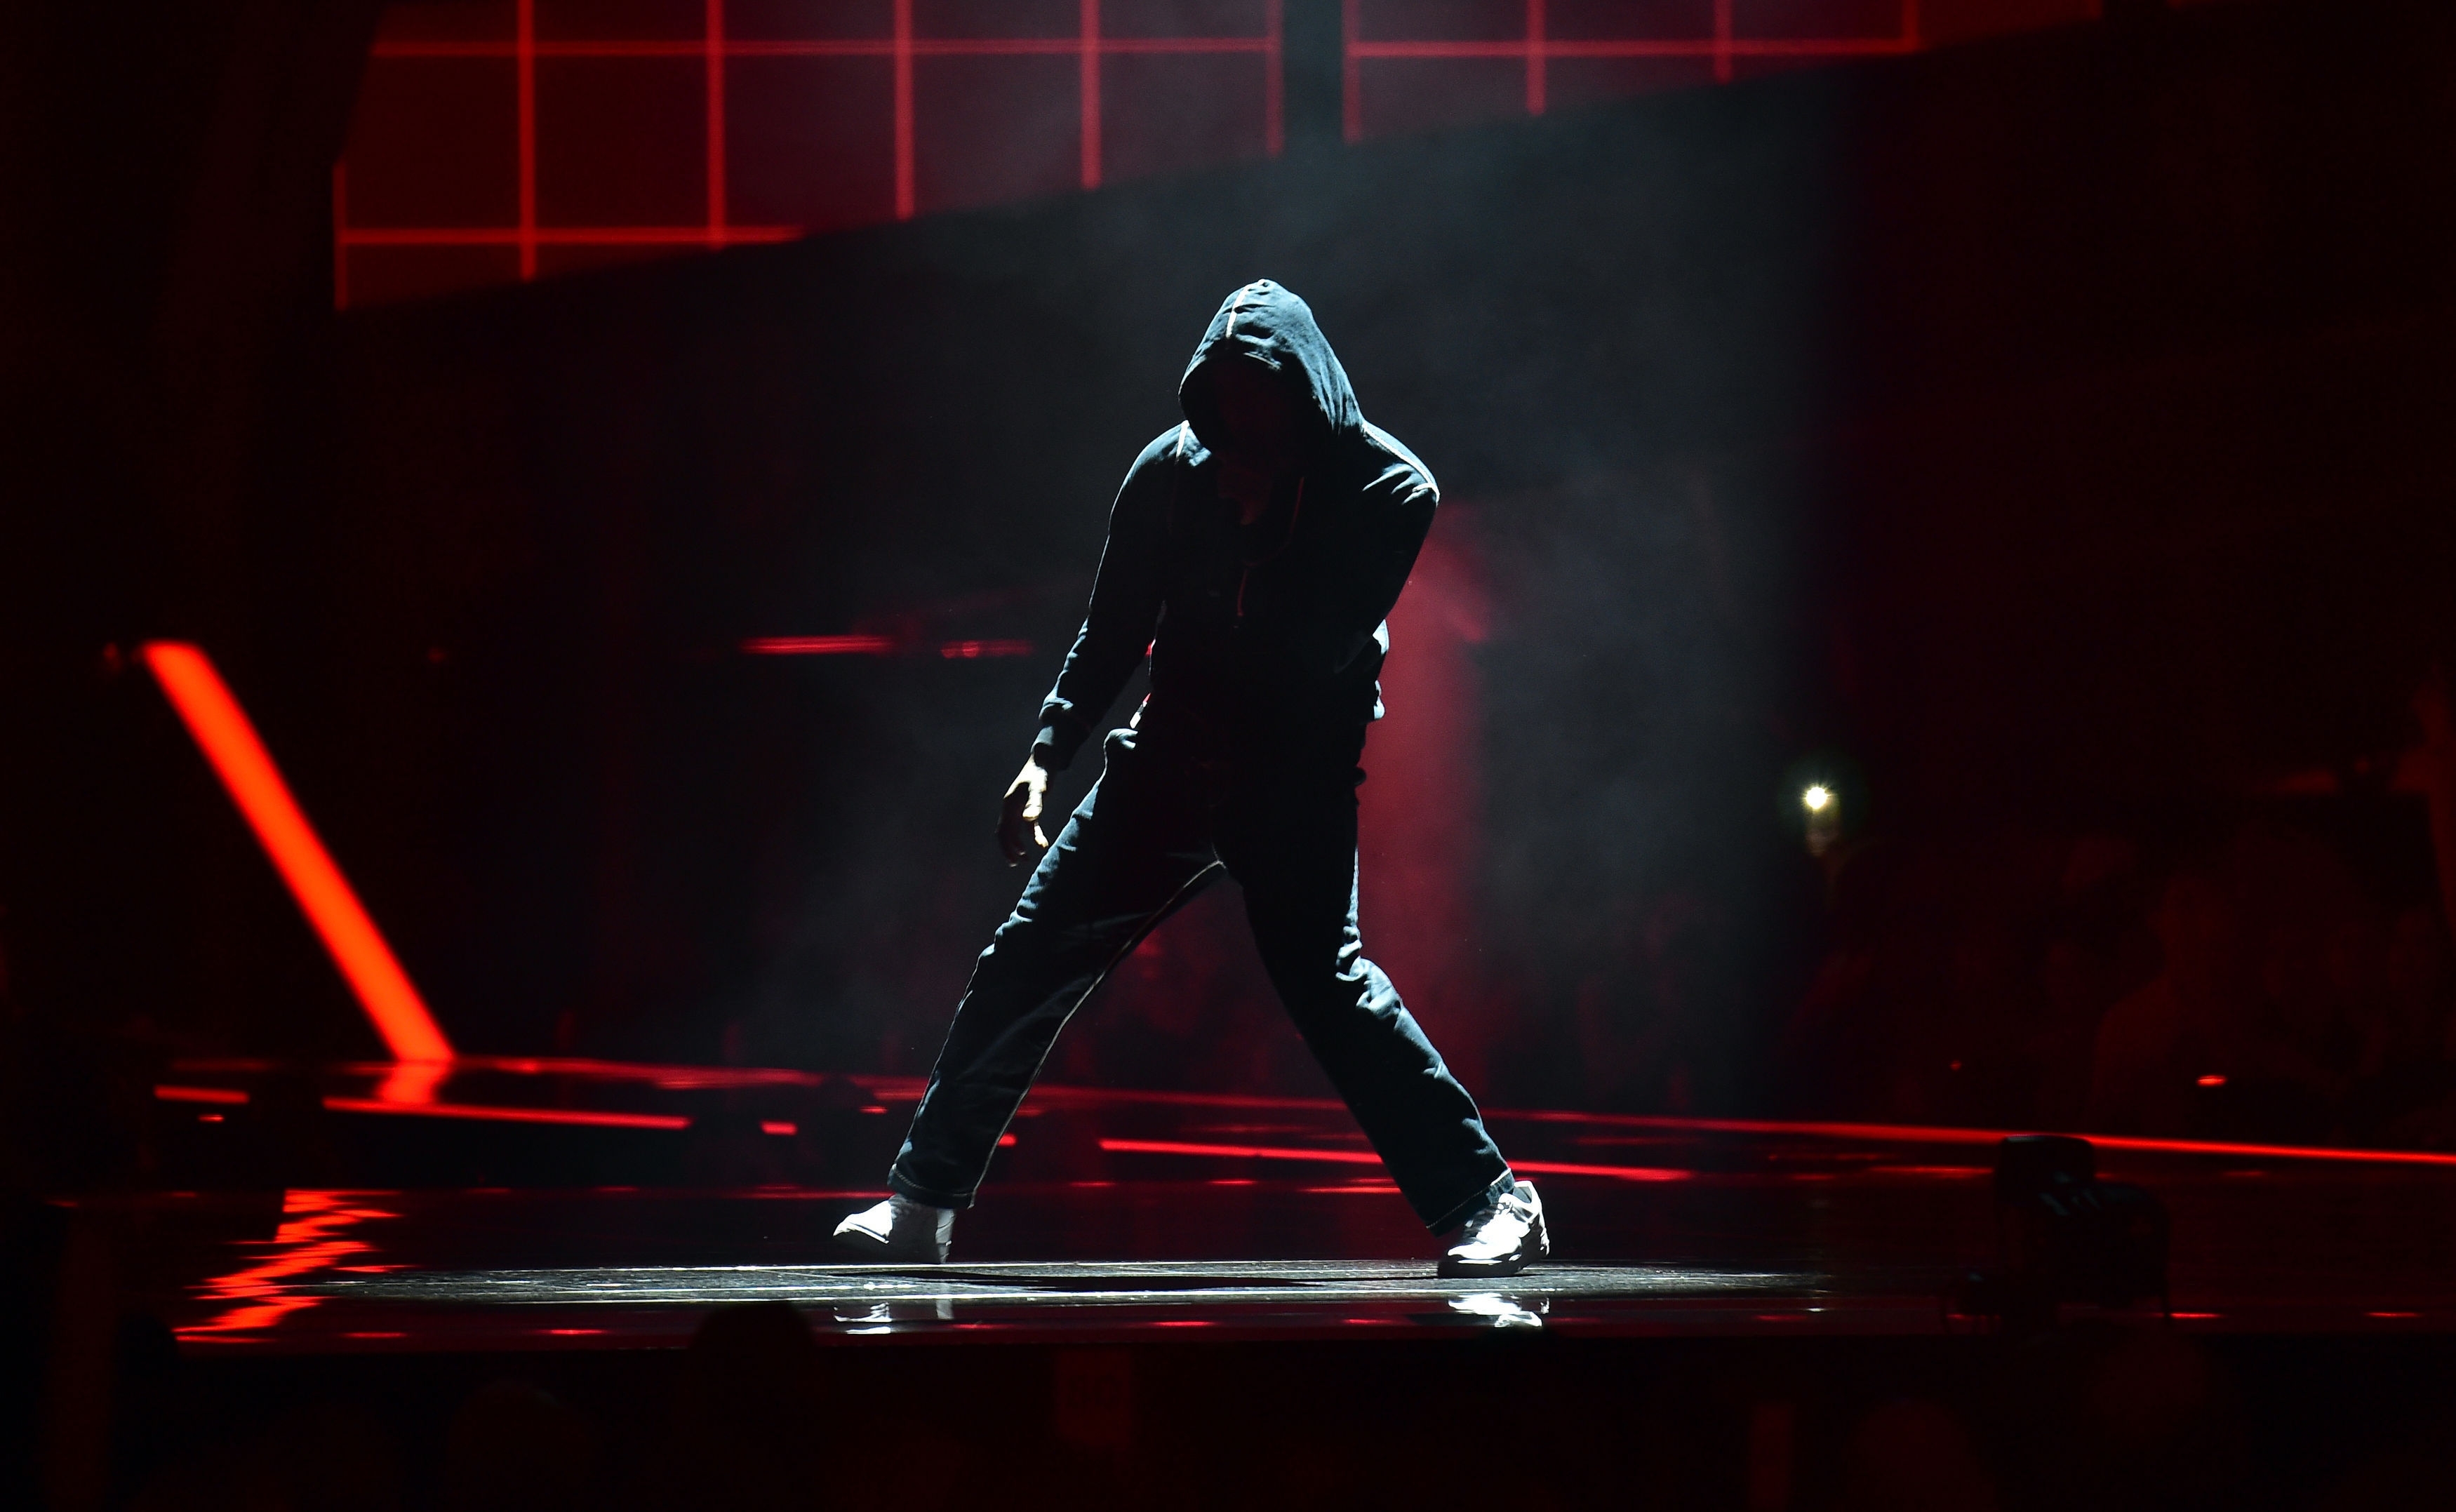 Skepta performing on stage at the Brit Awards at the O2 Arena